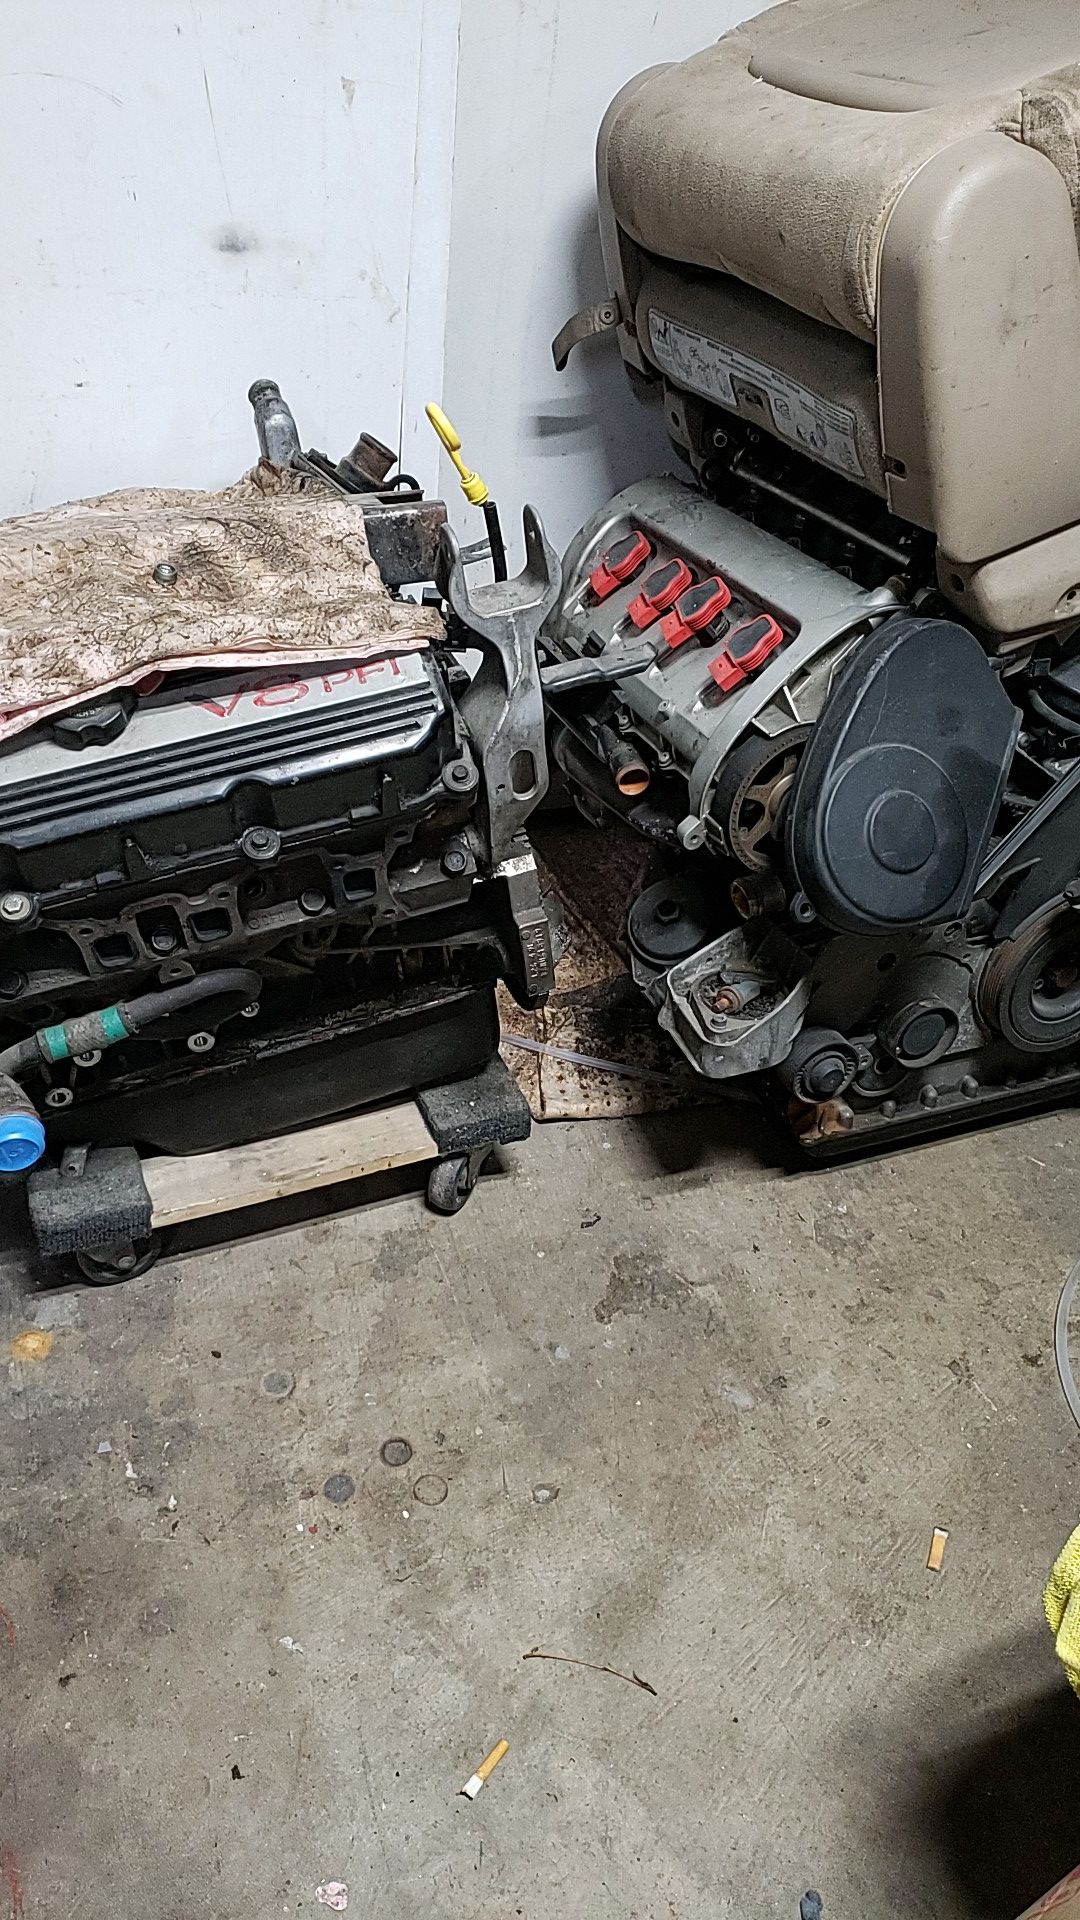 Audi Motor Is Gone Free Engines A Ac Unit From House And Other Scap